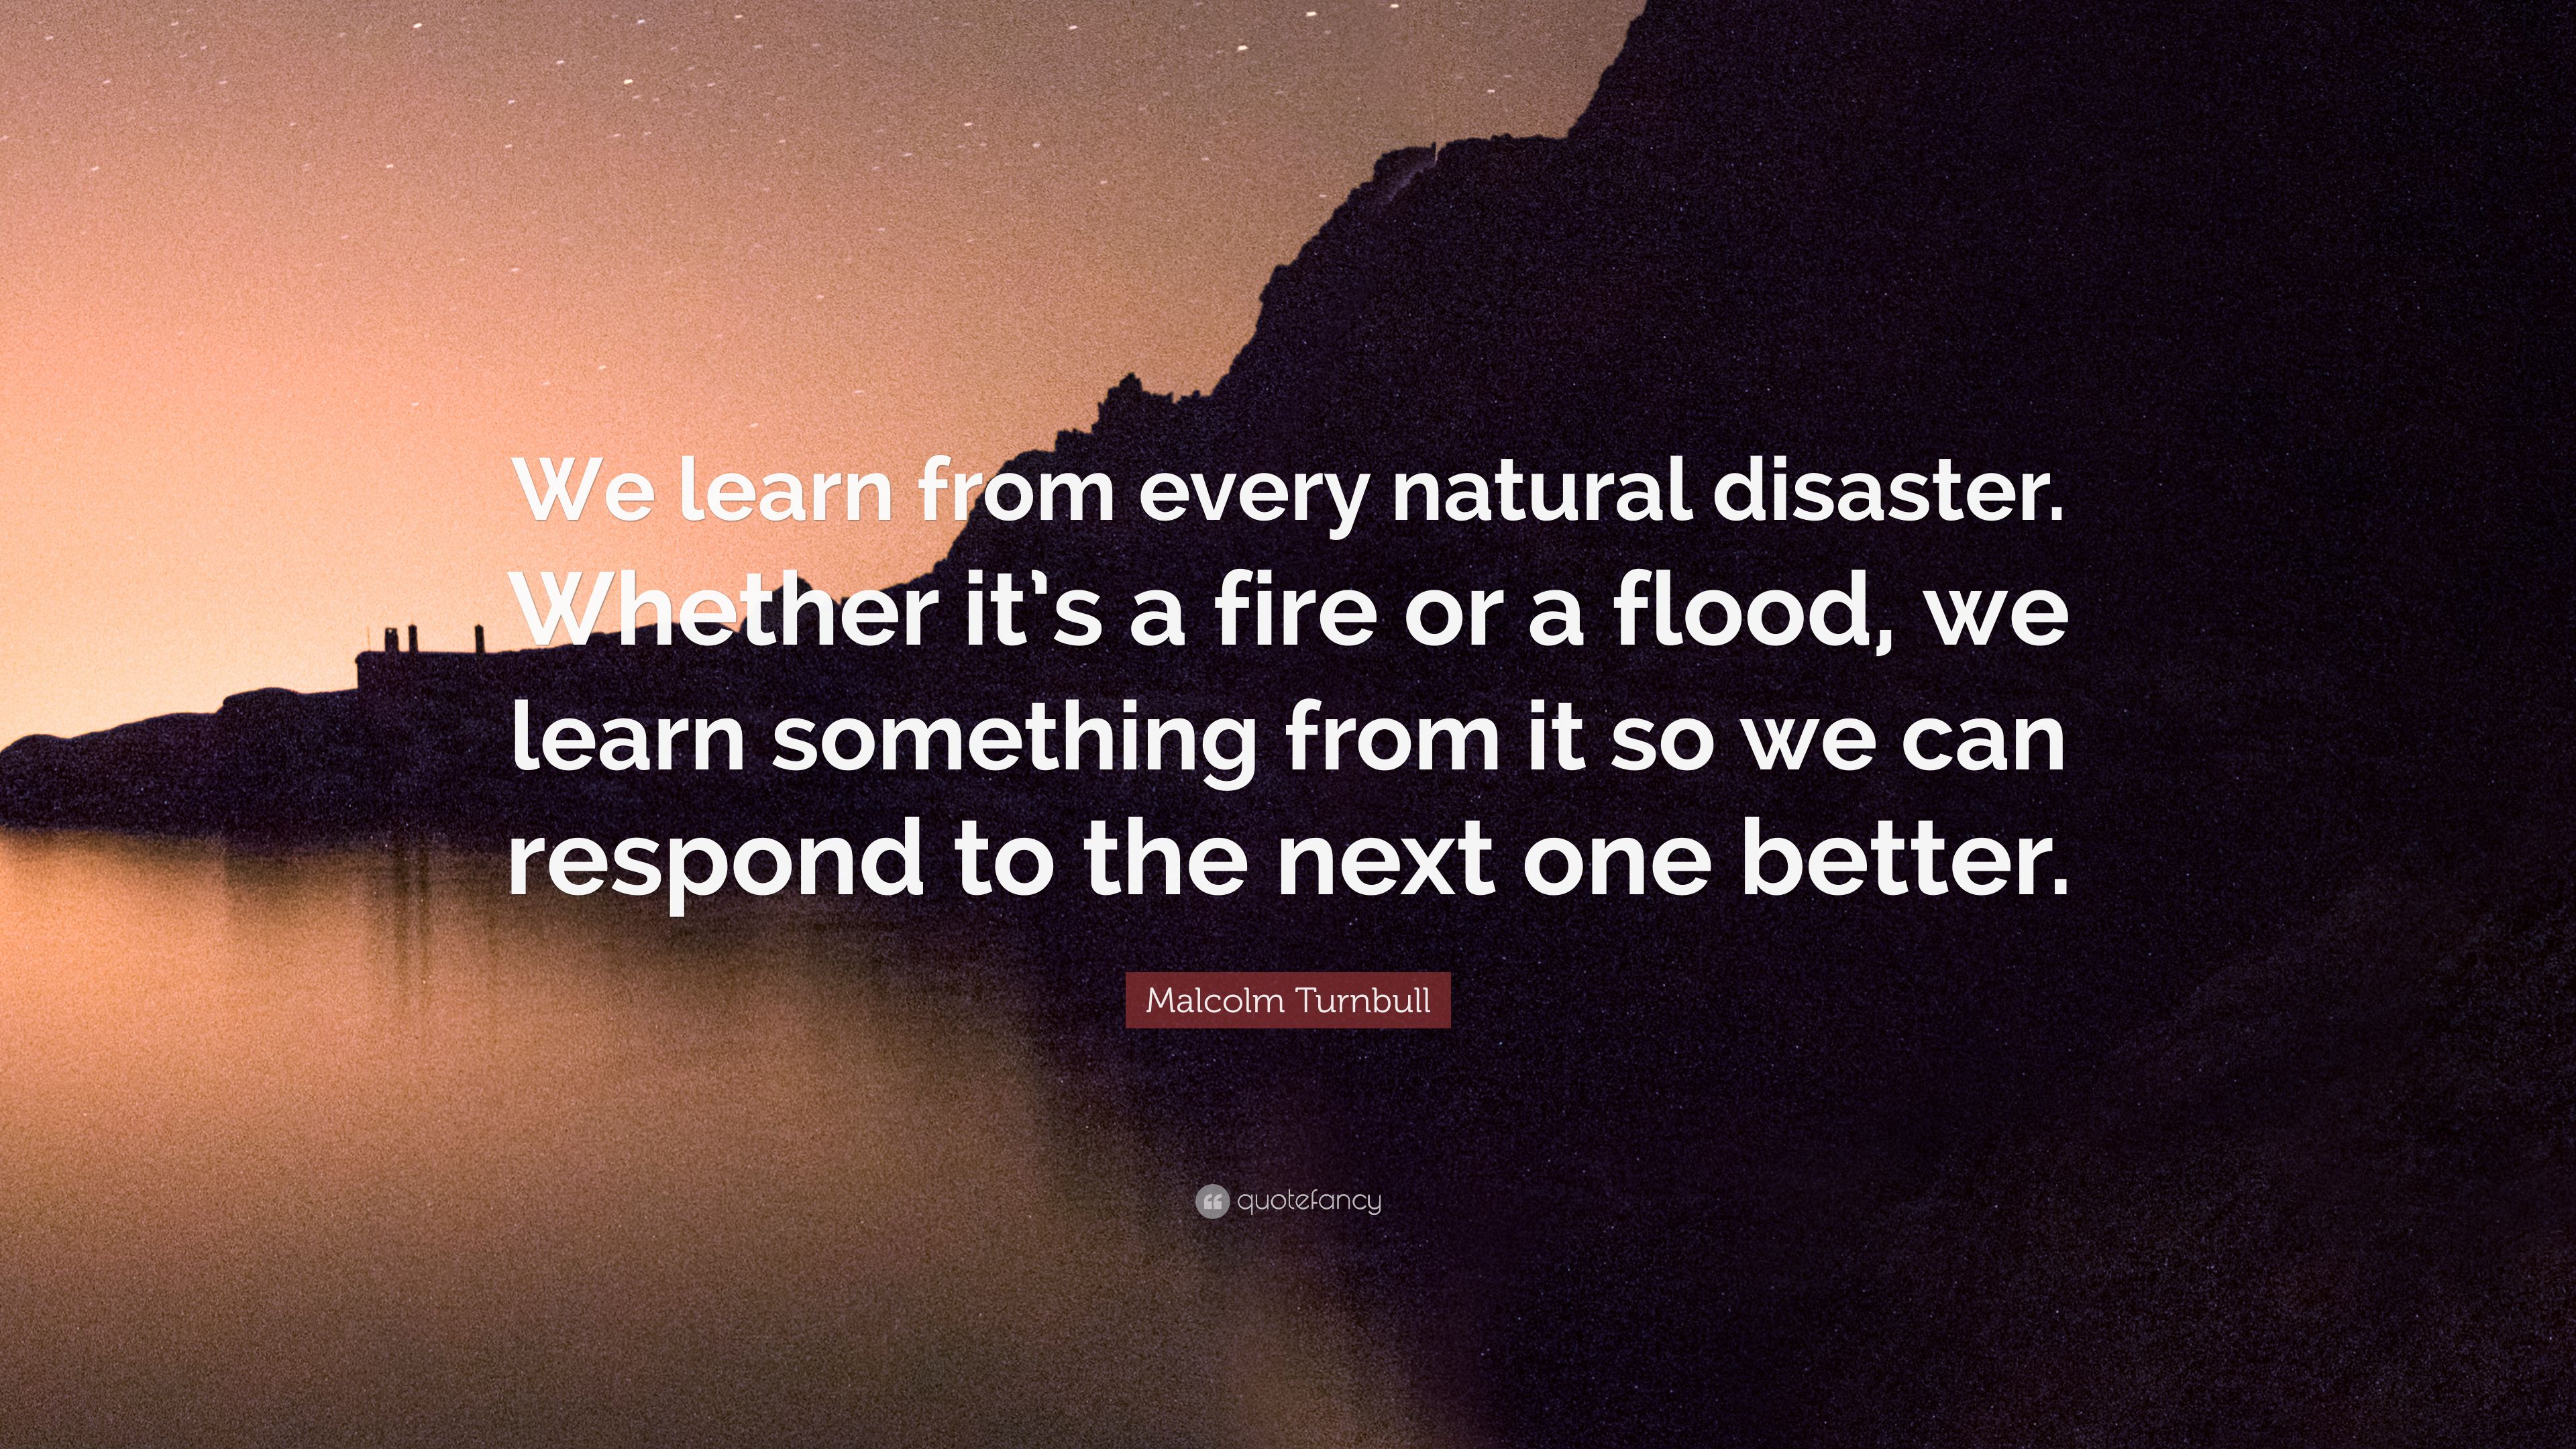 Malcolm Turnbull Quote: “We learn from every natural disaster. Whether it's a fire or a flood, we learn something from it so we can respond to th.” (9 wallpaper)